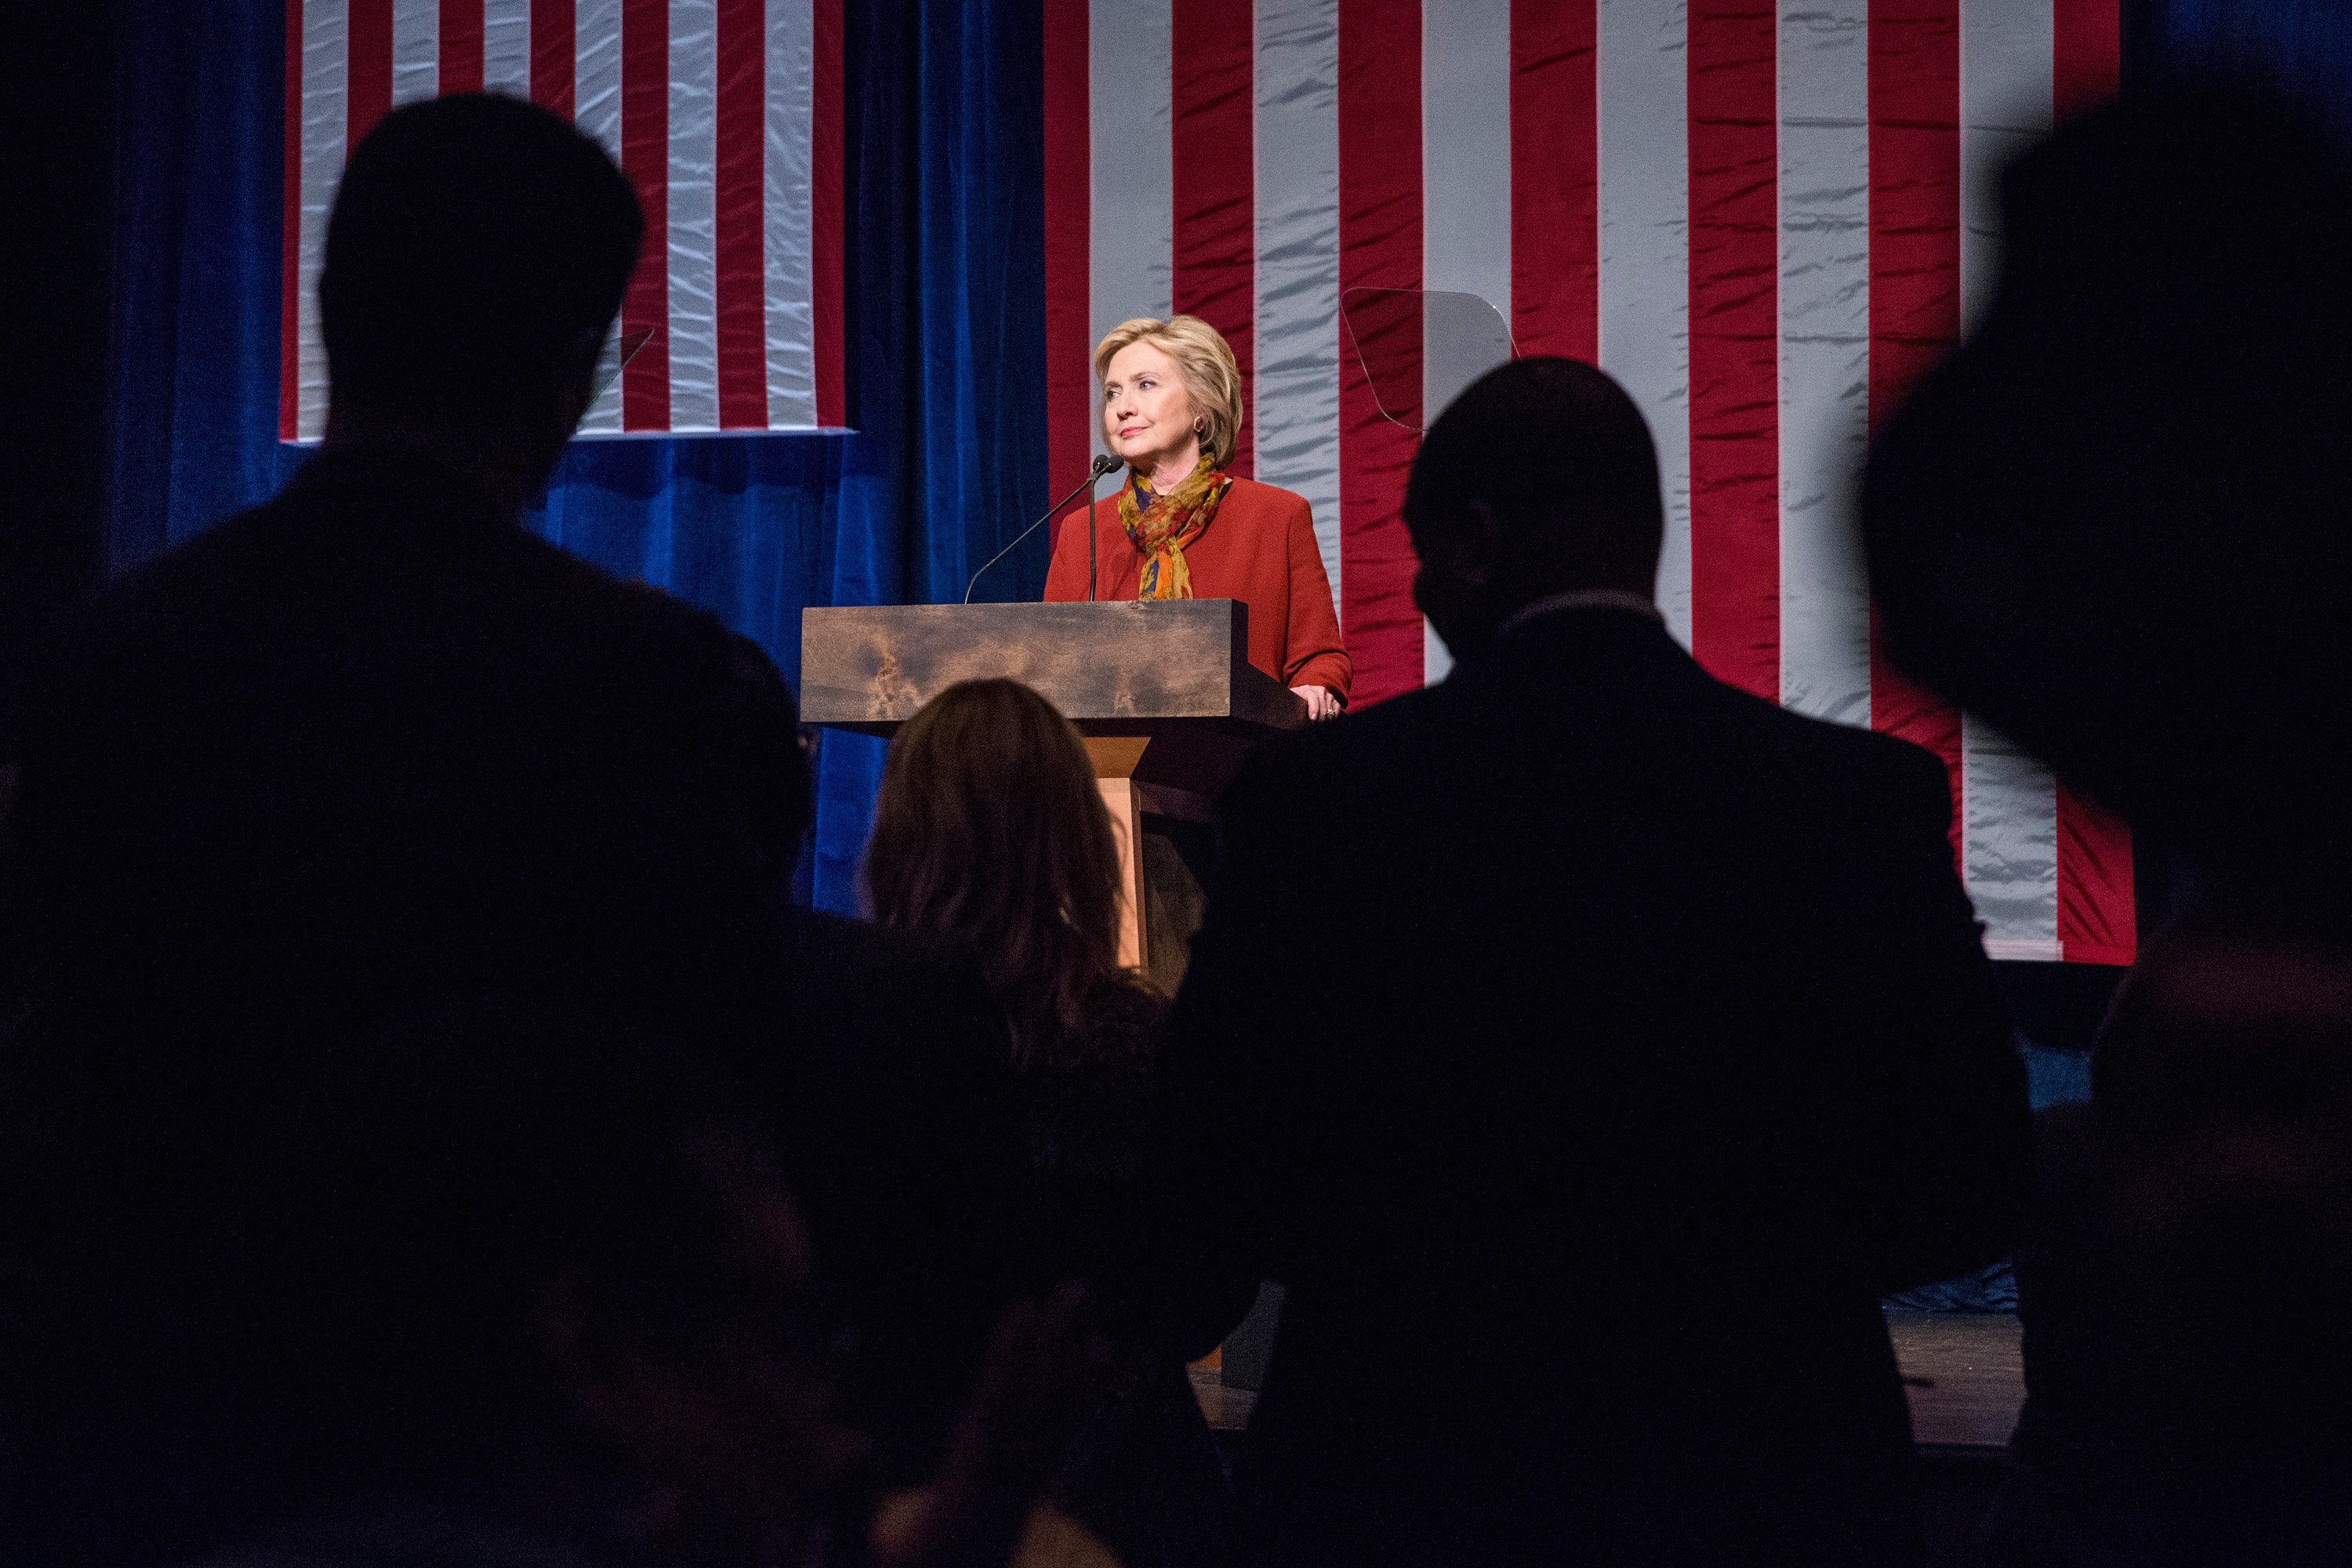 Hillary Clinton gives a speech at the Schomburg Center for Research in Black Culture on Feb. 16, 2016, in New York City (Andrew Burton—Getty Images)